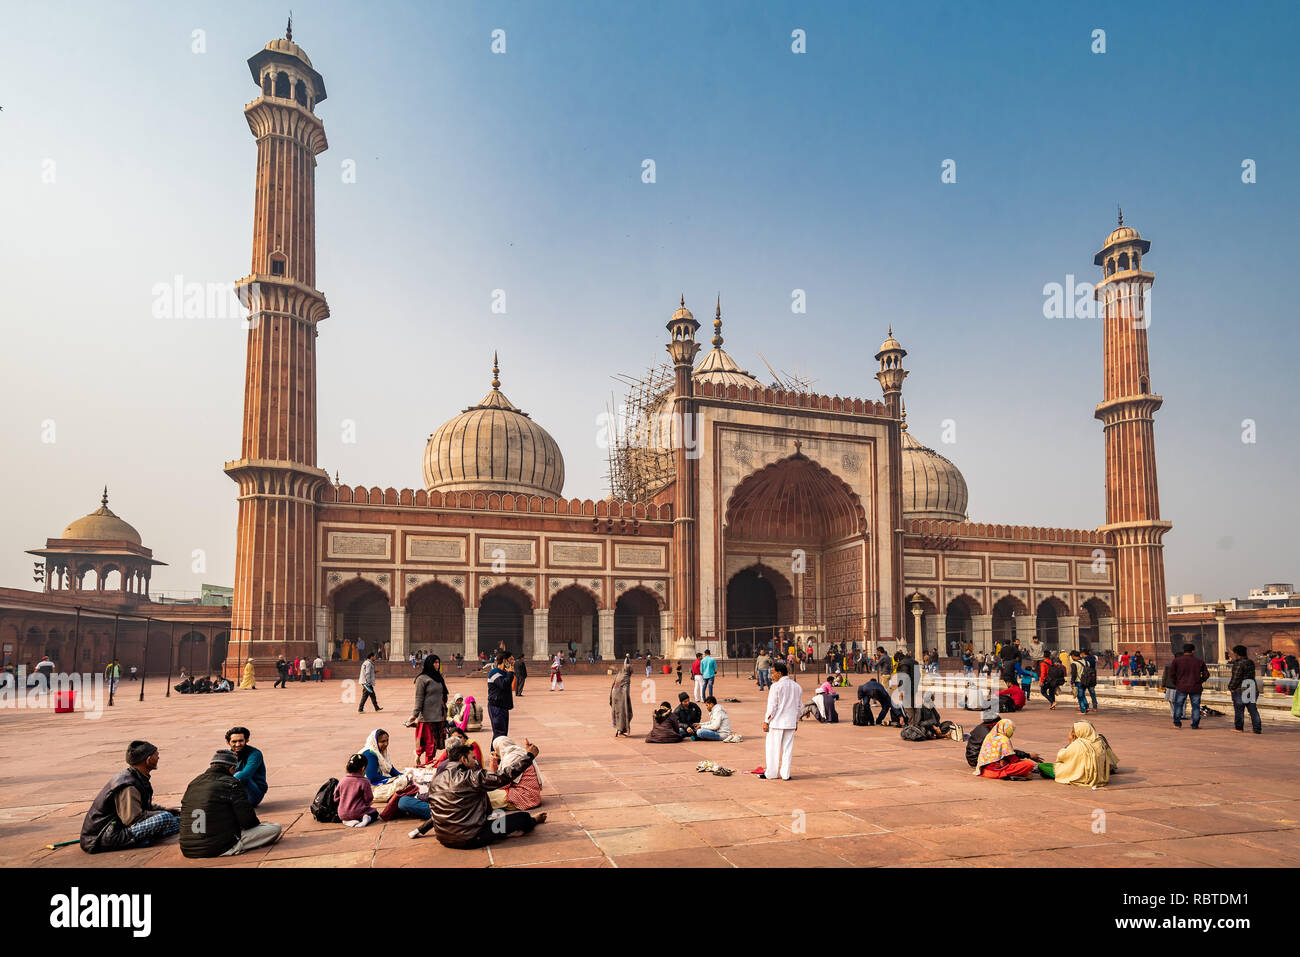 The main courtyard in Jama Masjid - a very famous mosque in Delhi, India Stock Photo